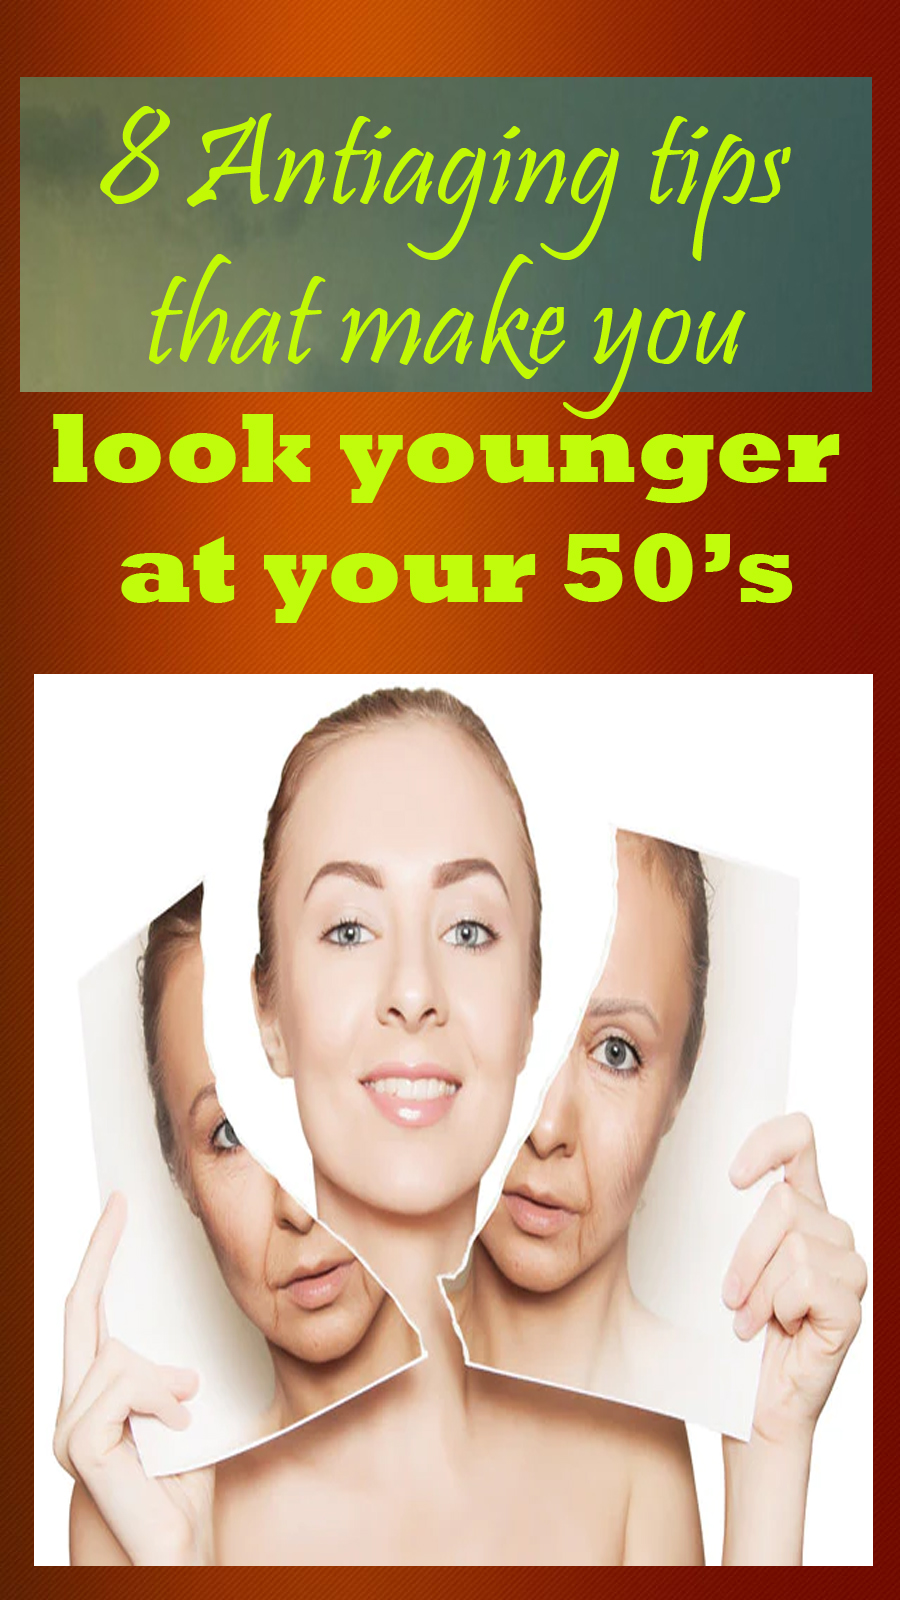 8 Antiaging tips that make you look younger at your 50' s